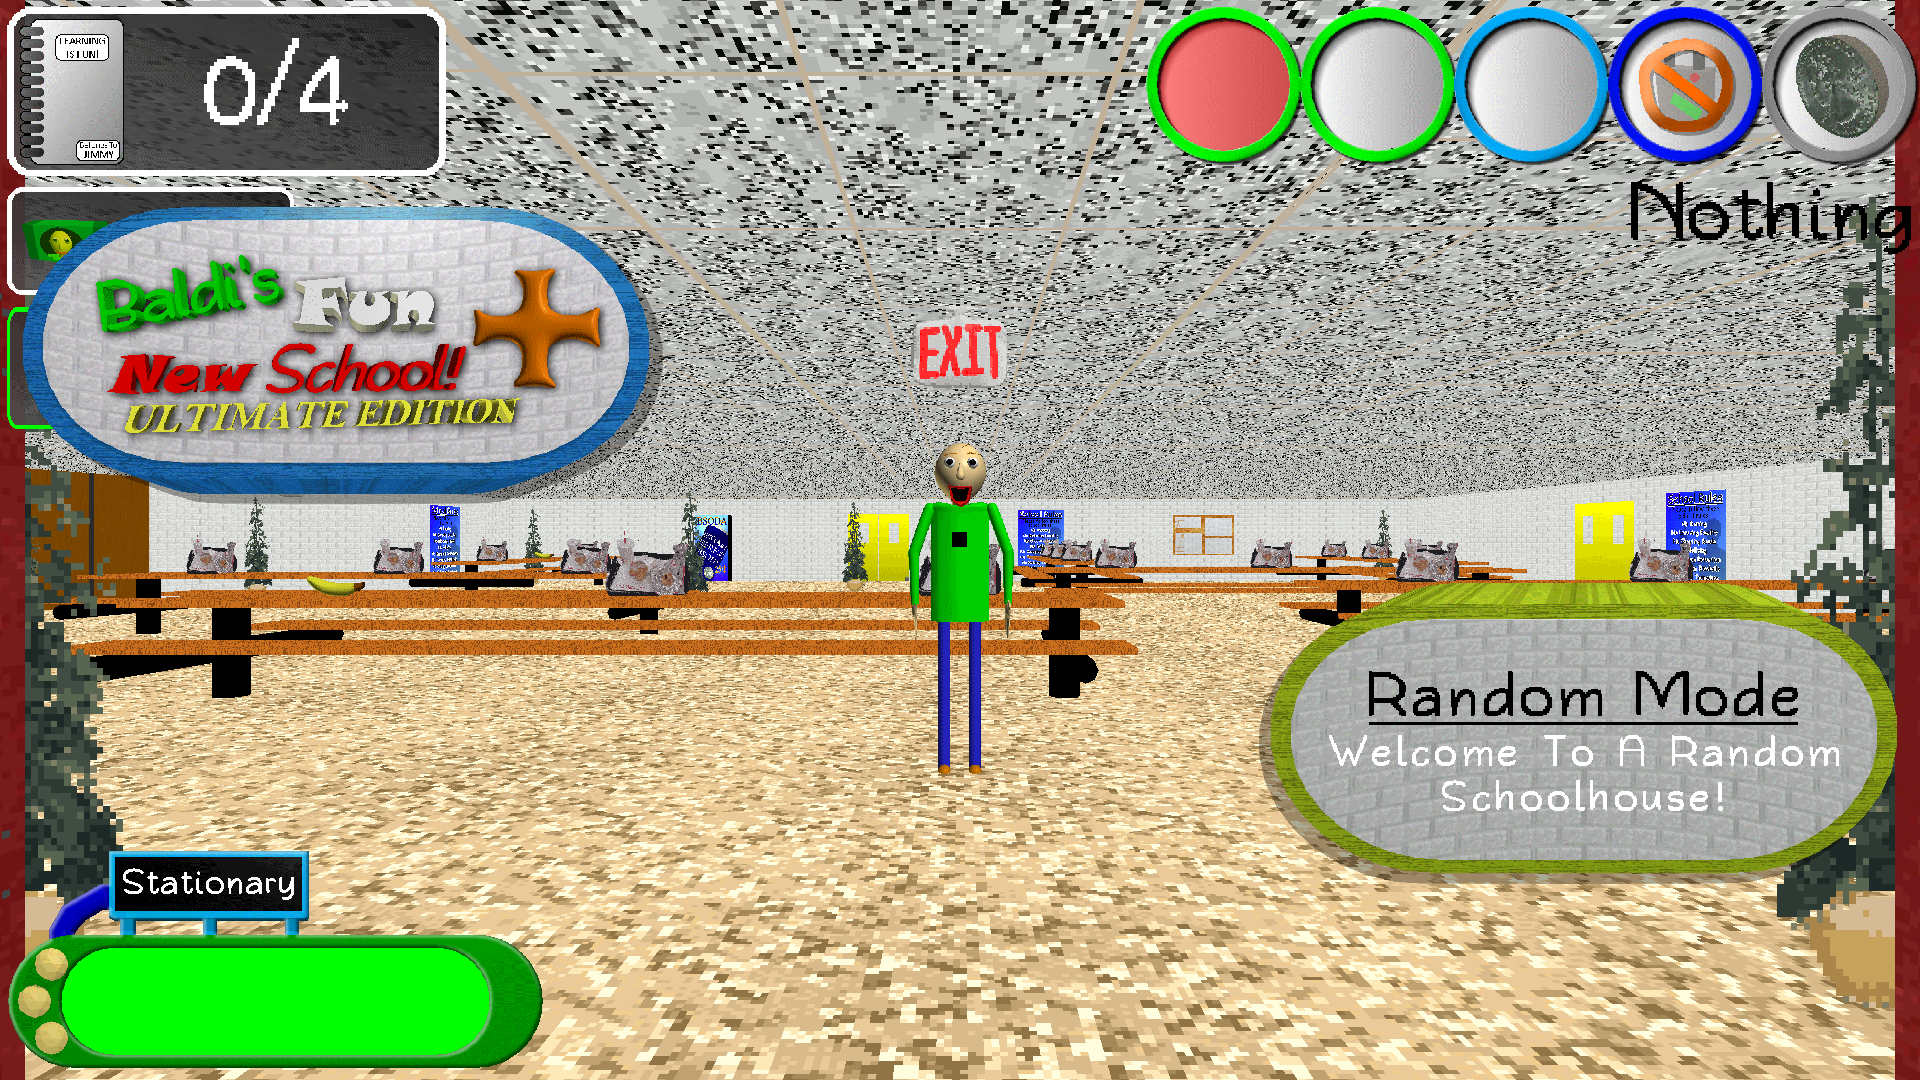 Baldi classic remastered mods. BFNS Plus Ultimate Edition.